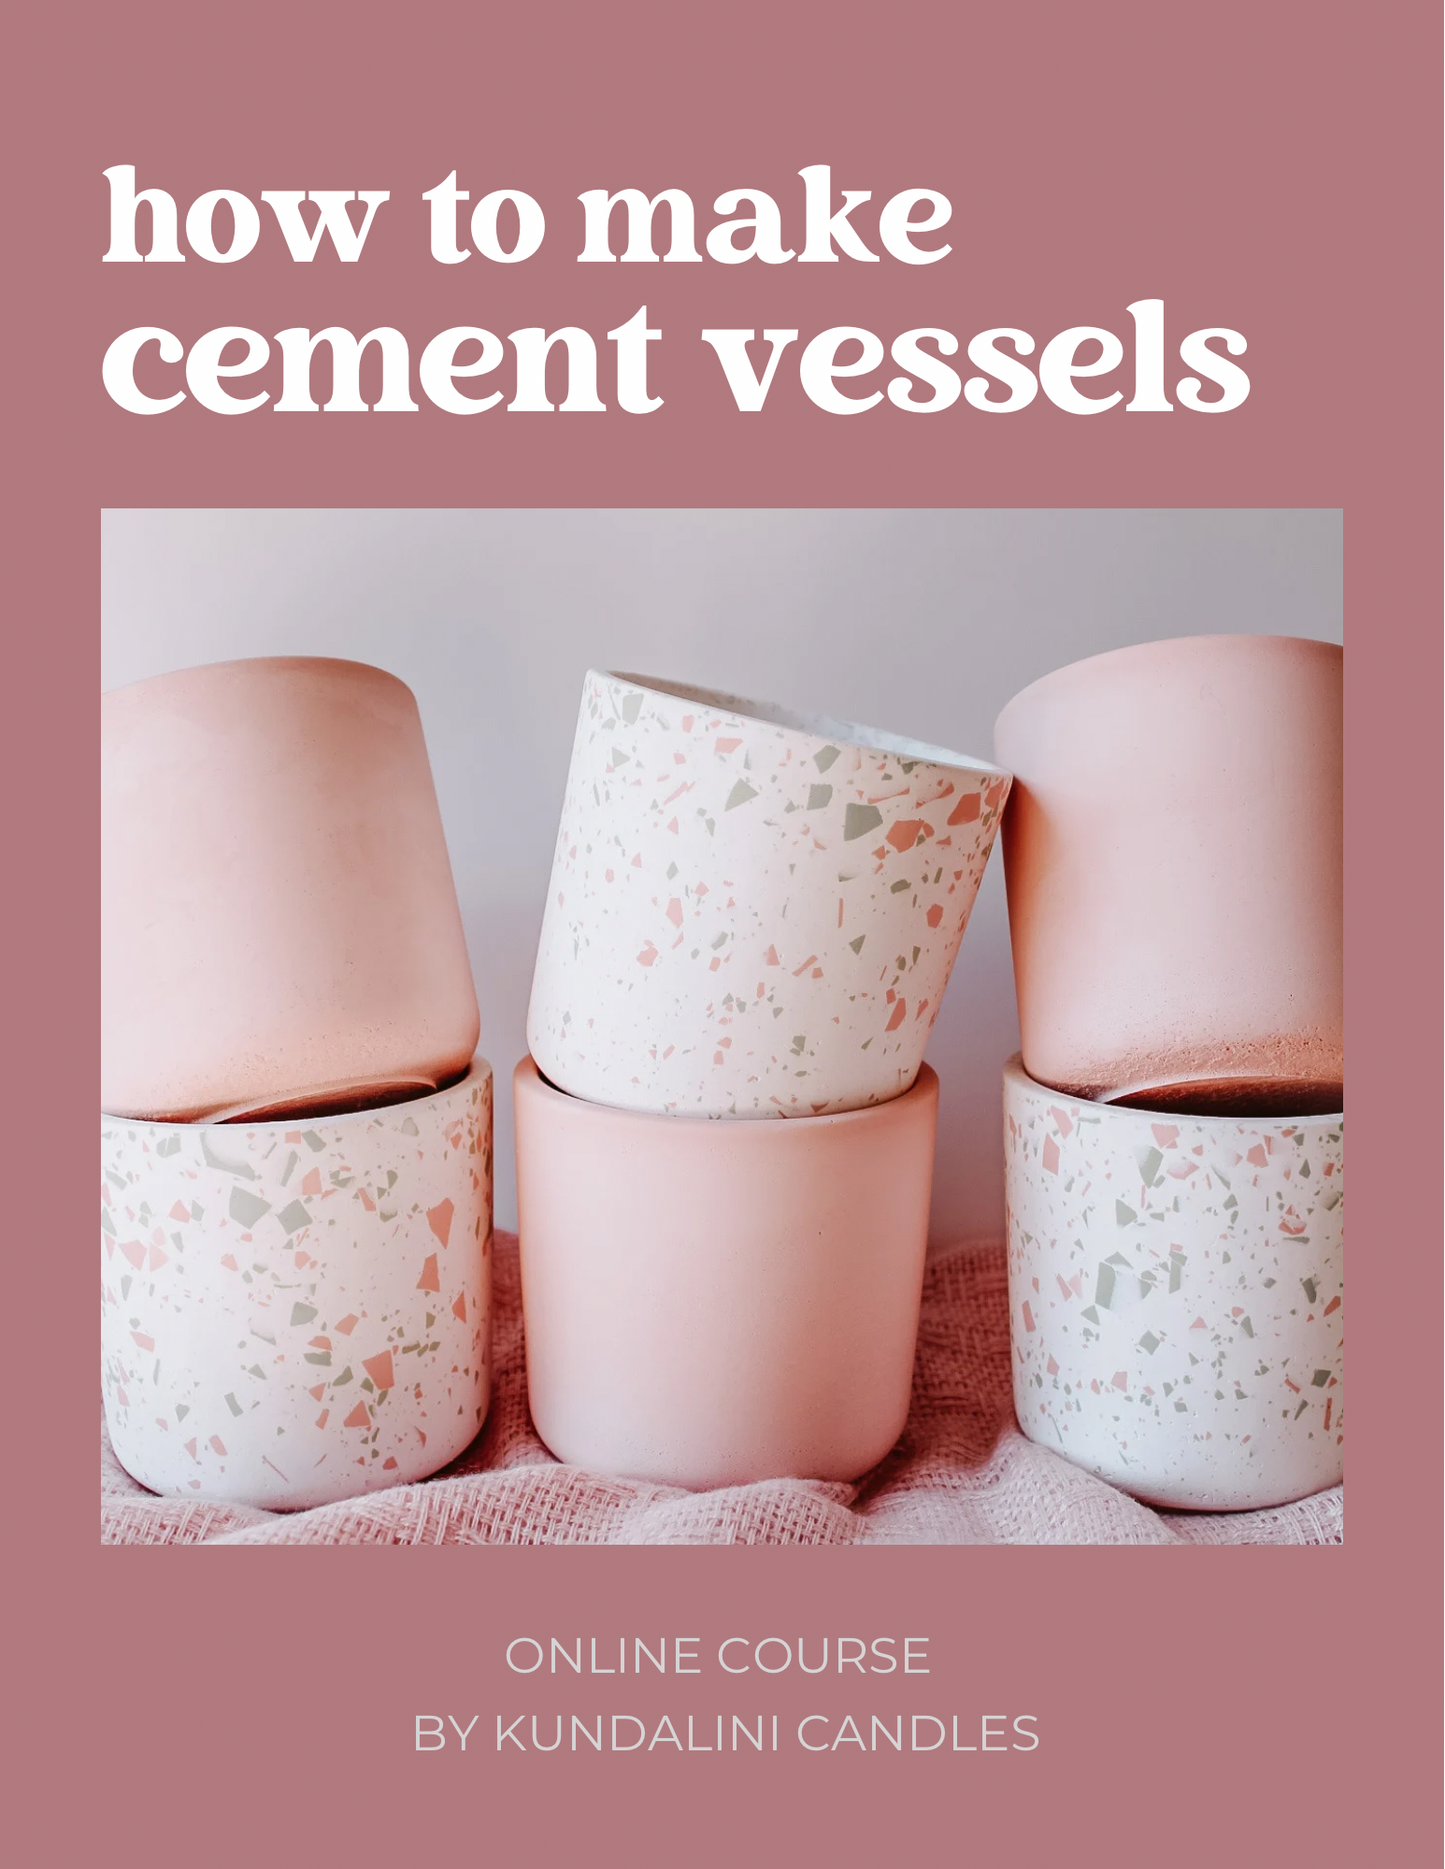 course: how to make cement vessels